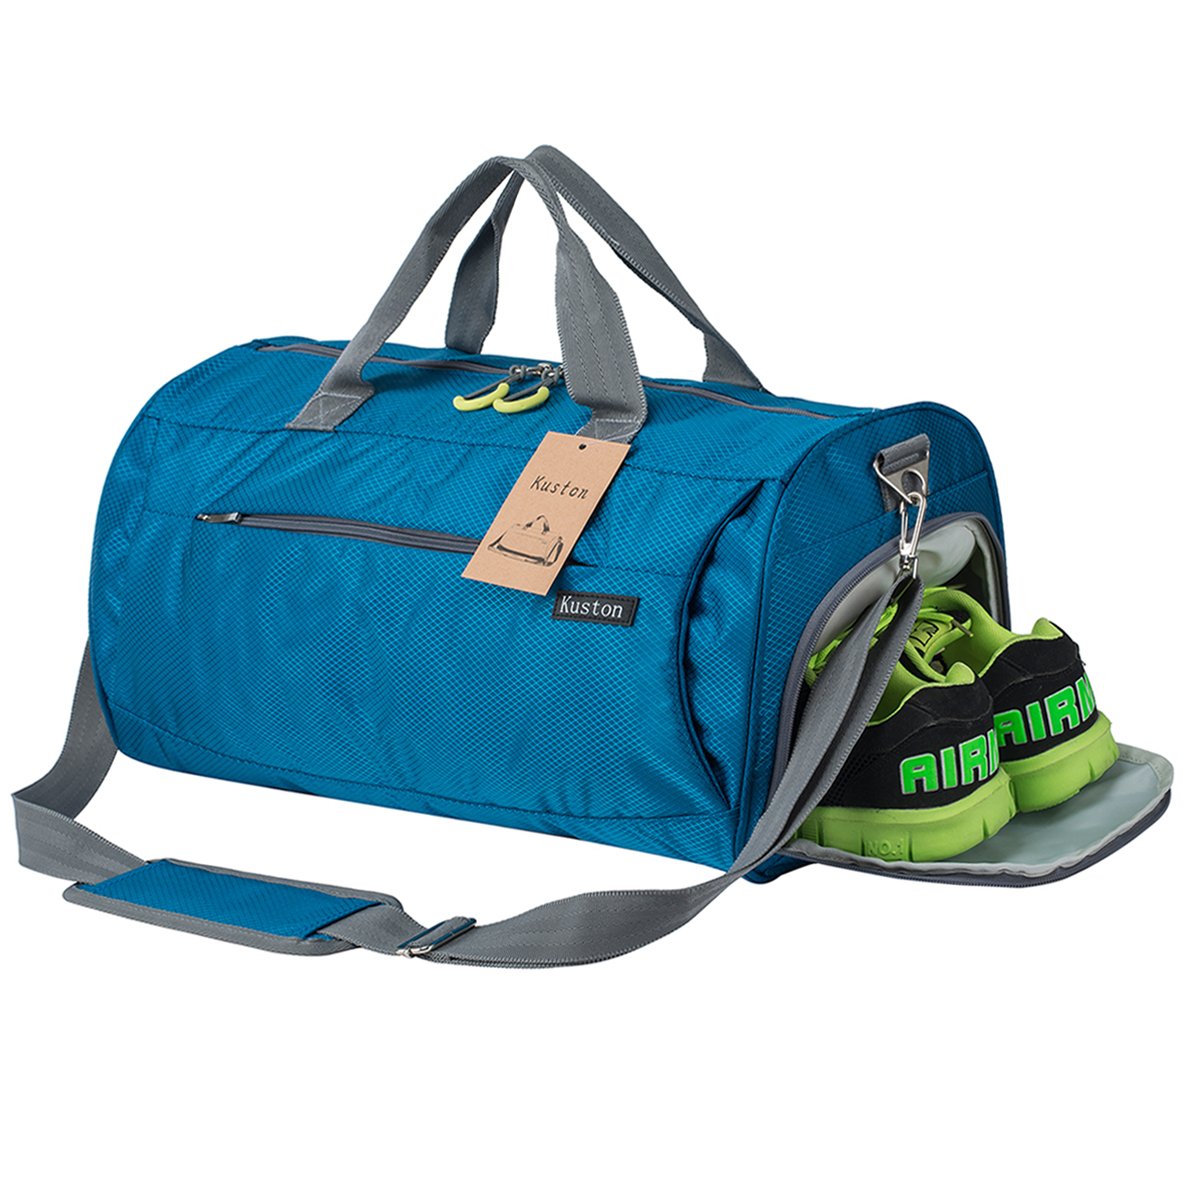 Kuston-Sports-Gym-Bag-with-Shoes-Compartment-Travel-Duffel-Bag